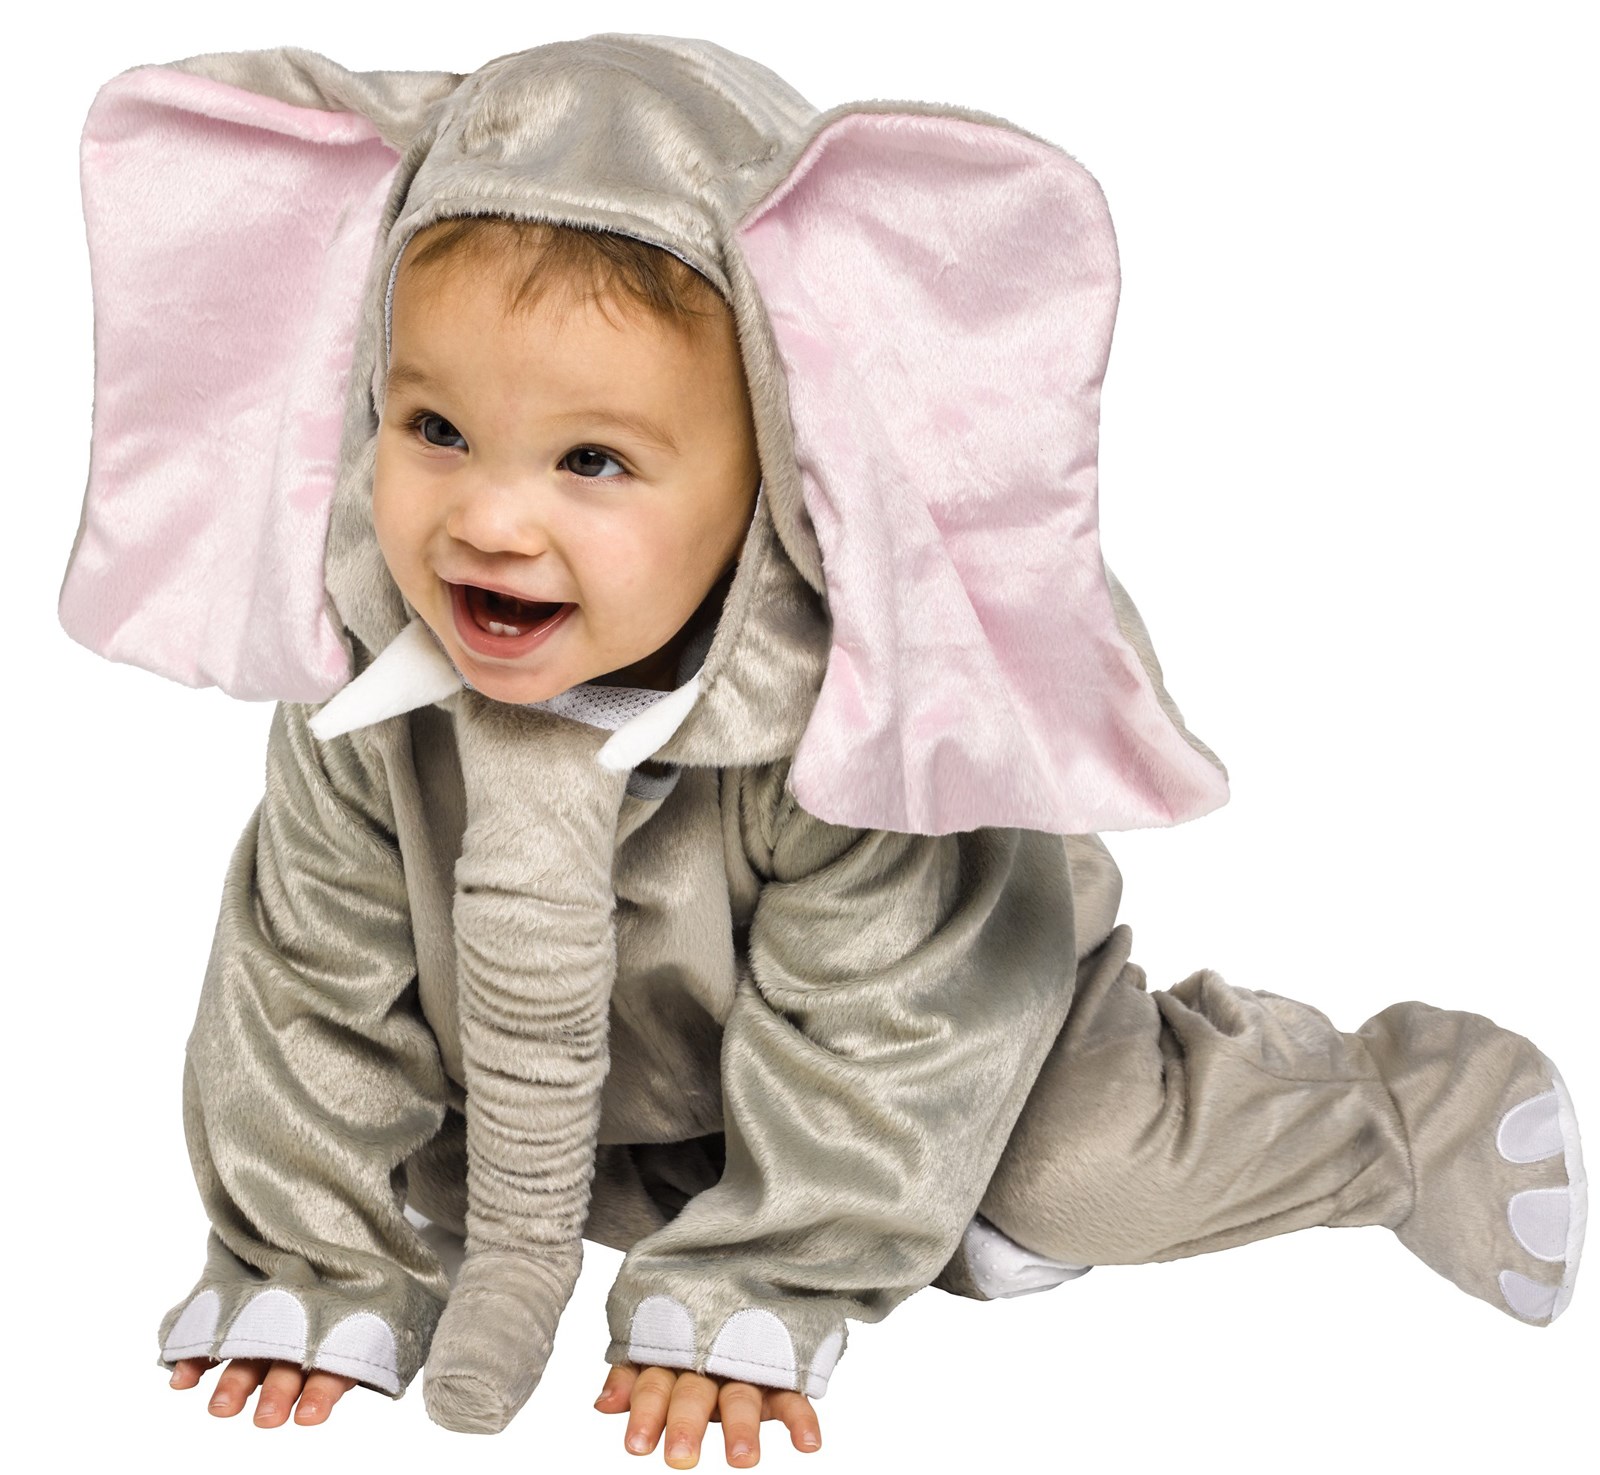 Elephant Costumes For Babies